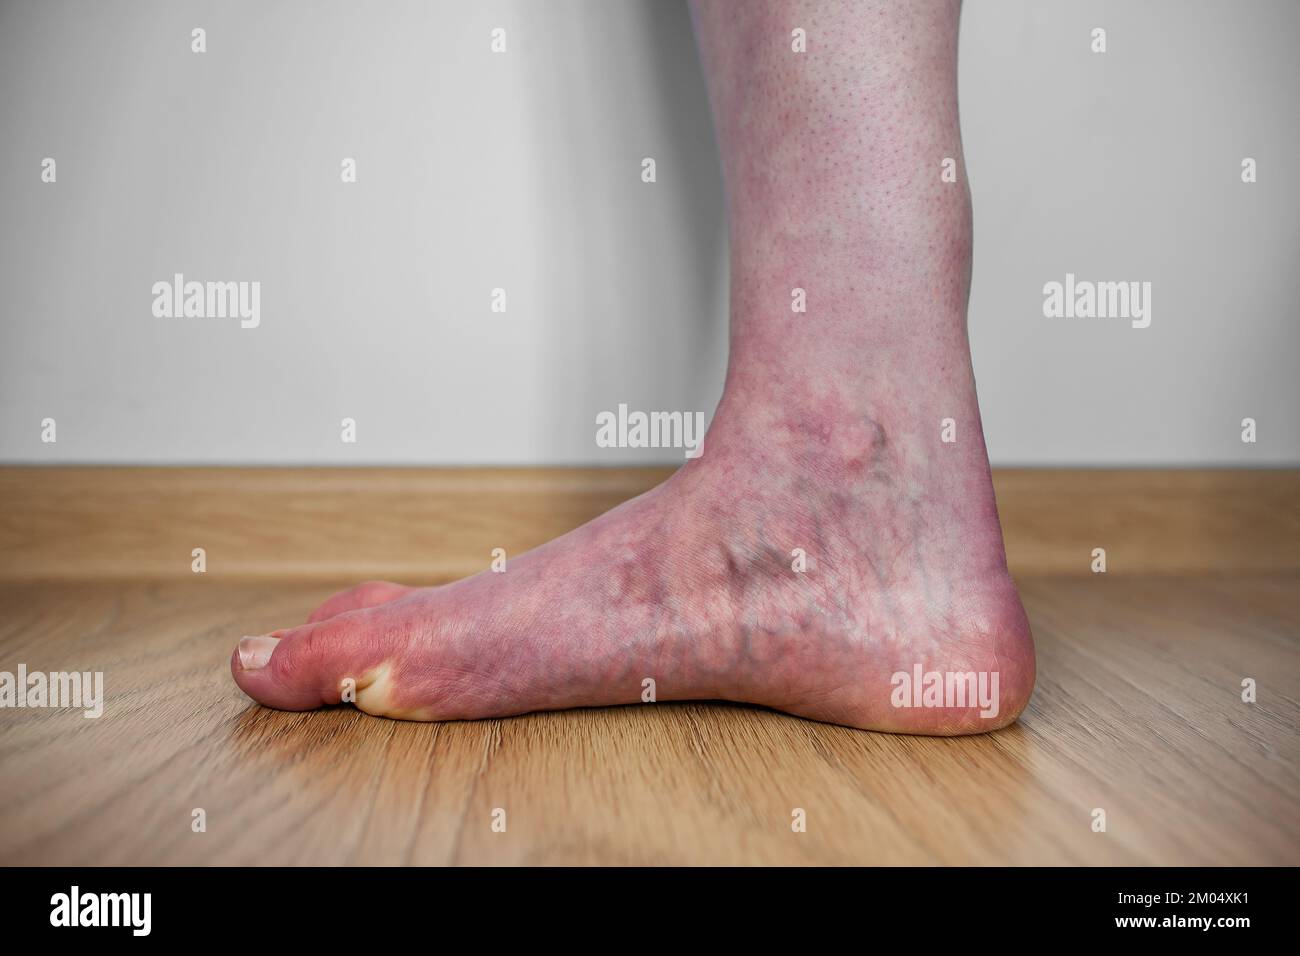 Leg of person with orthostatic intolerance syndrome with purple discoloration upon standing, Dysautonomia blood pooling in legs Livedo reticularis Stock Photo